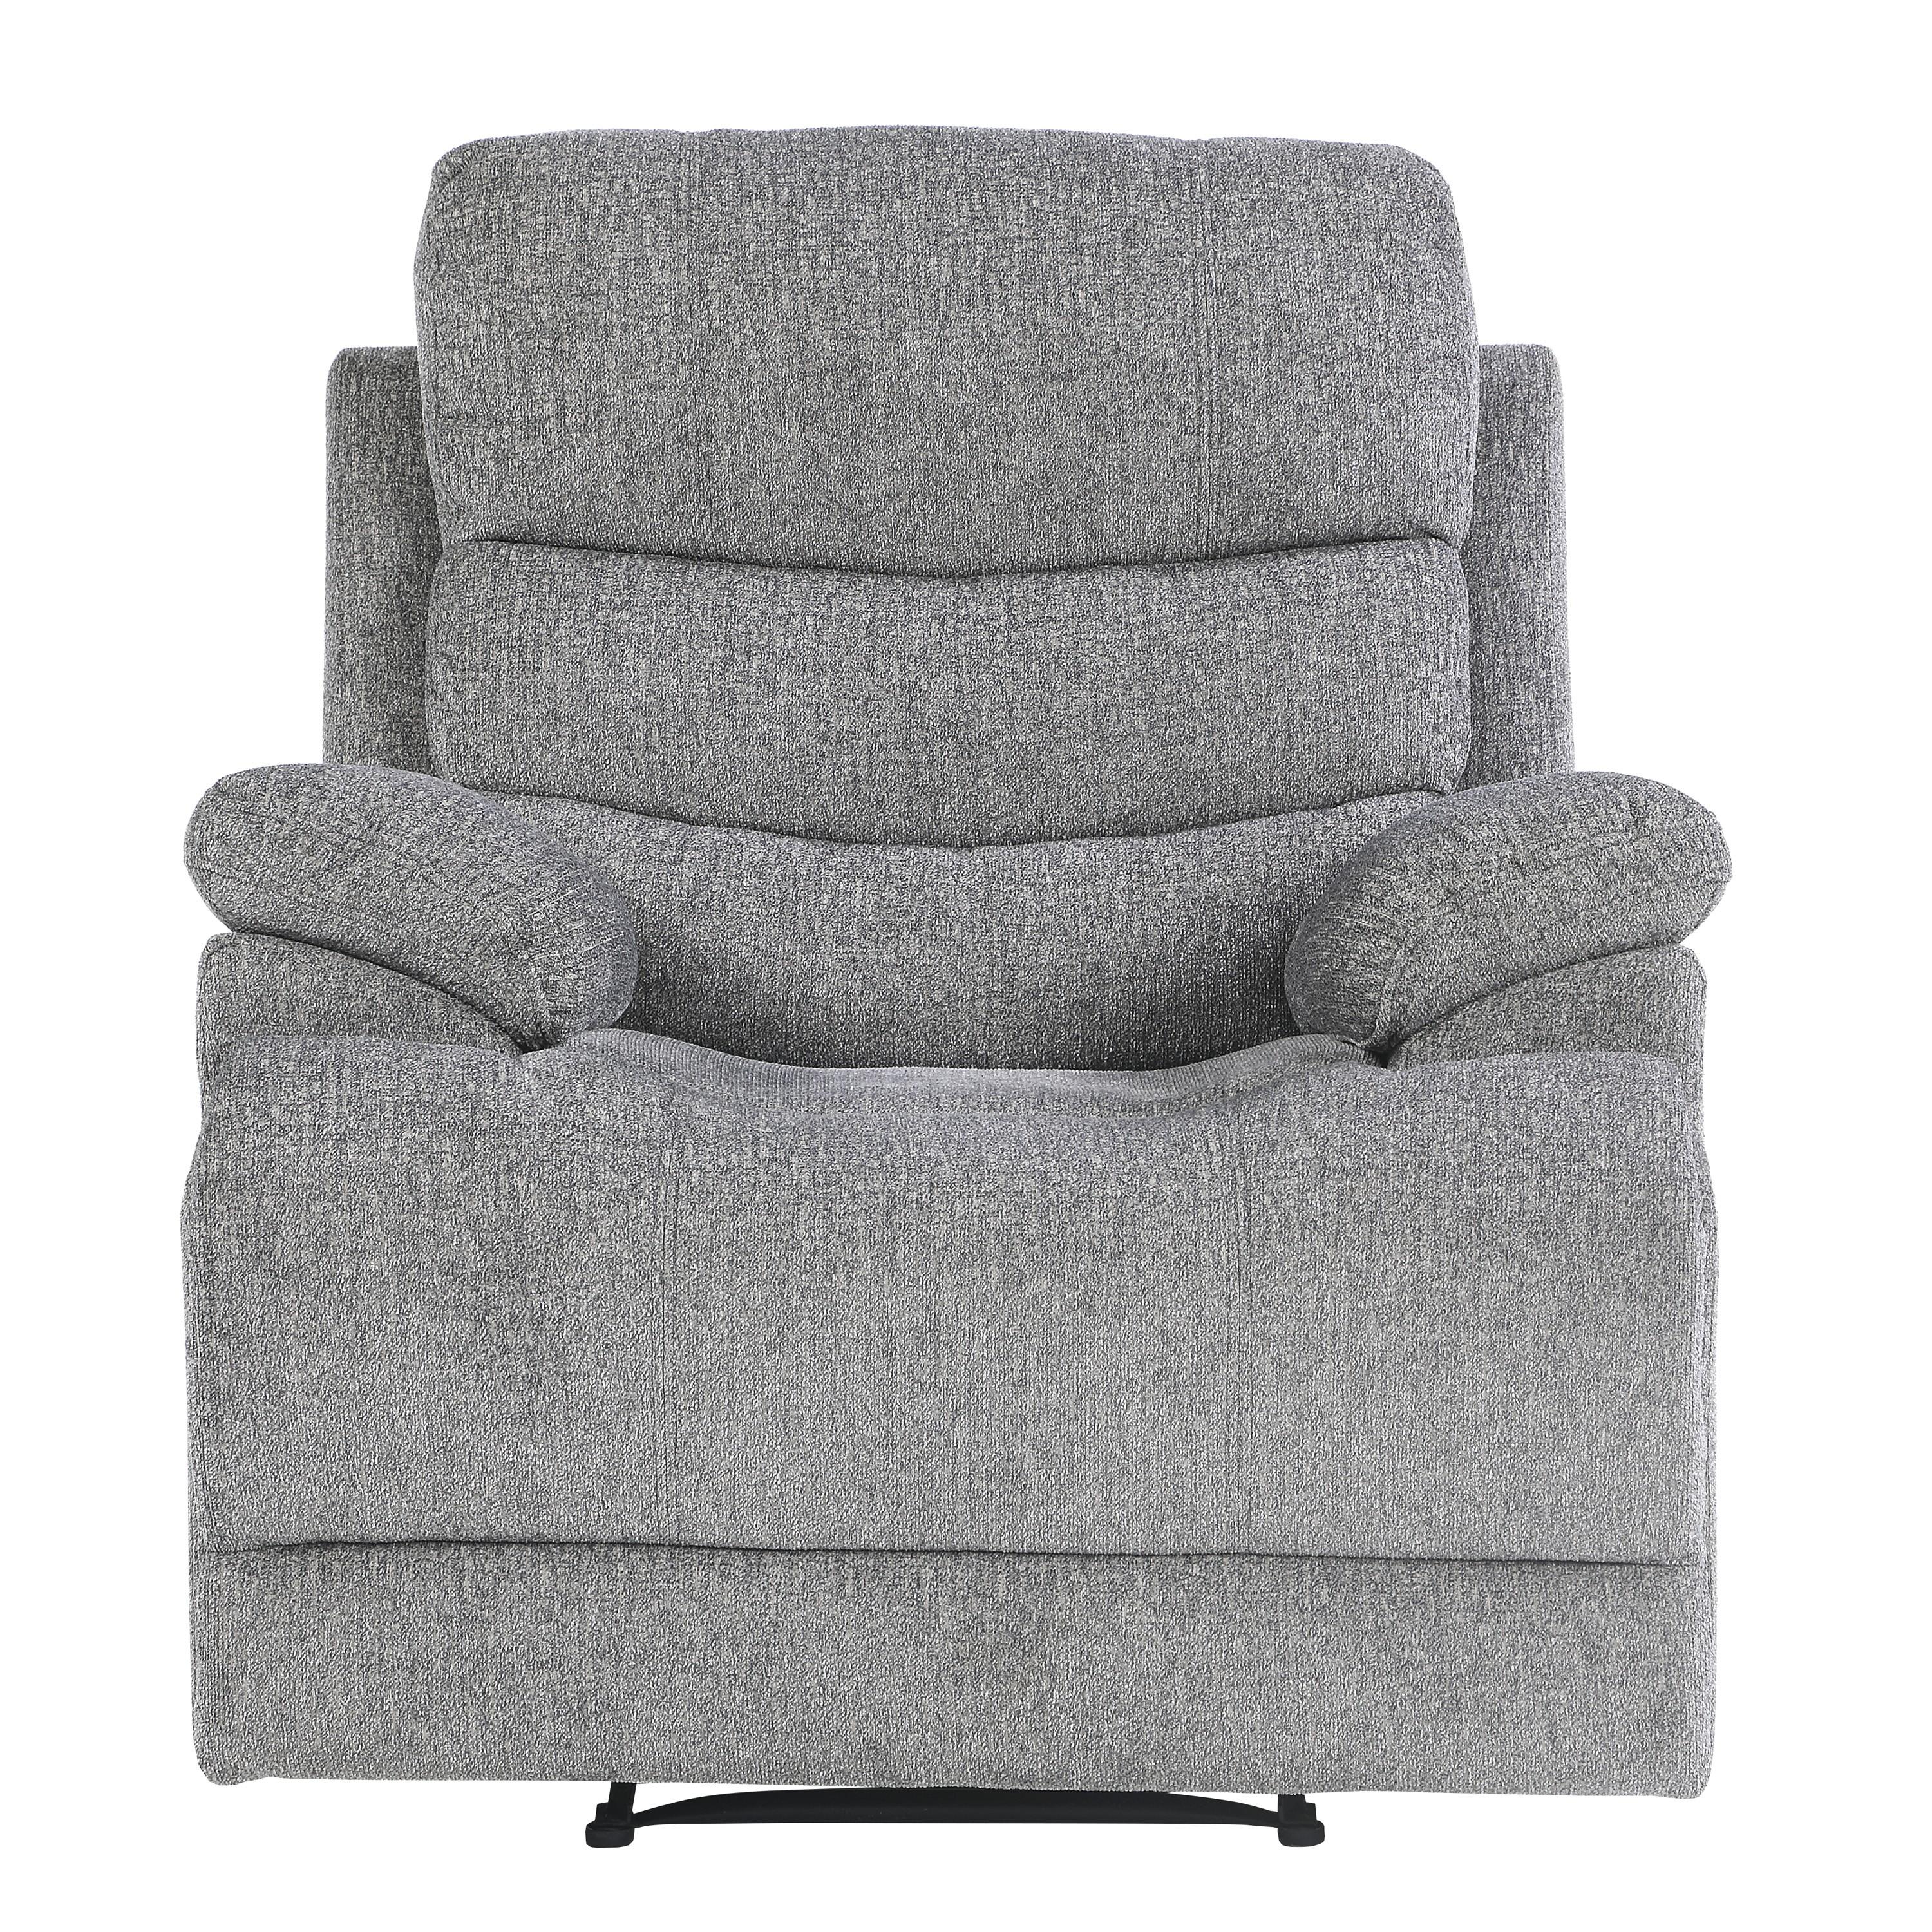 Transitional Reclining Chair 9422FS-1 Sherbrook 9422FS-1 in Gray Chenille